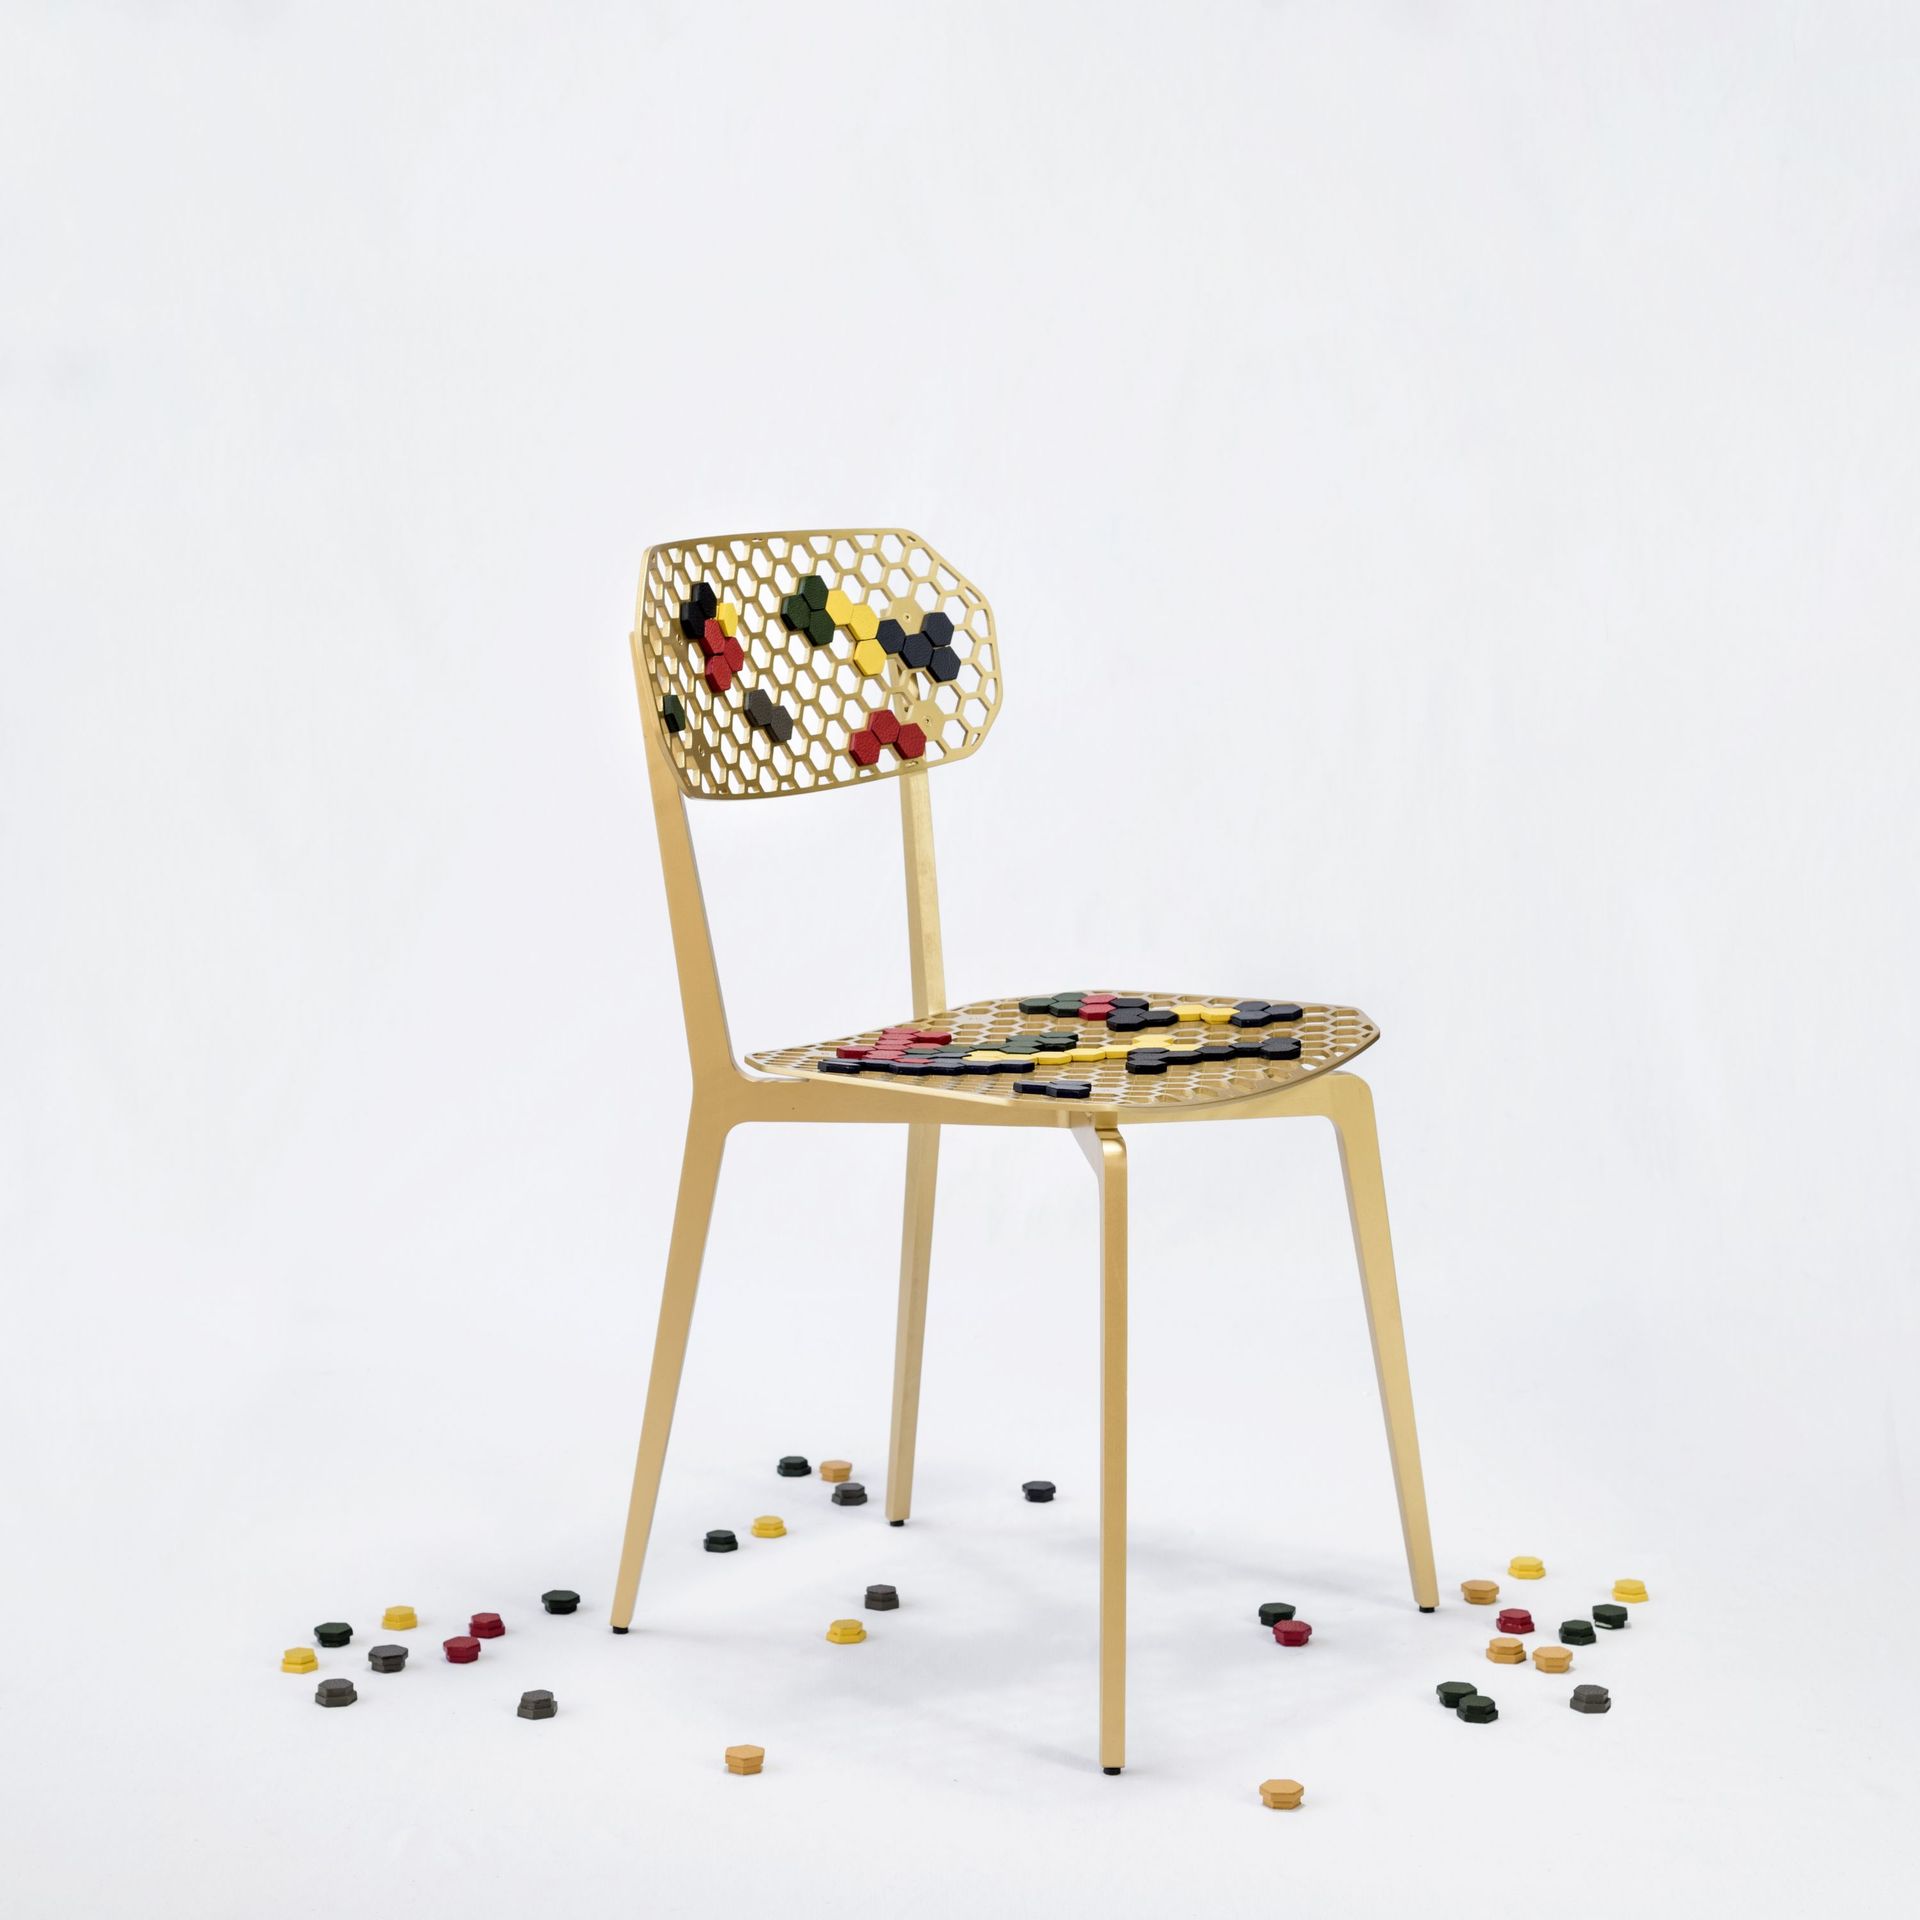 Georges Mohasseb – Bee Collection (chair) – 2015